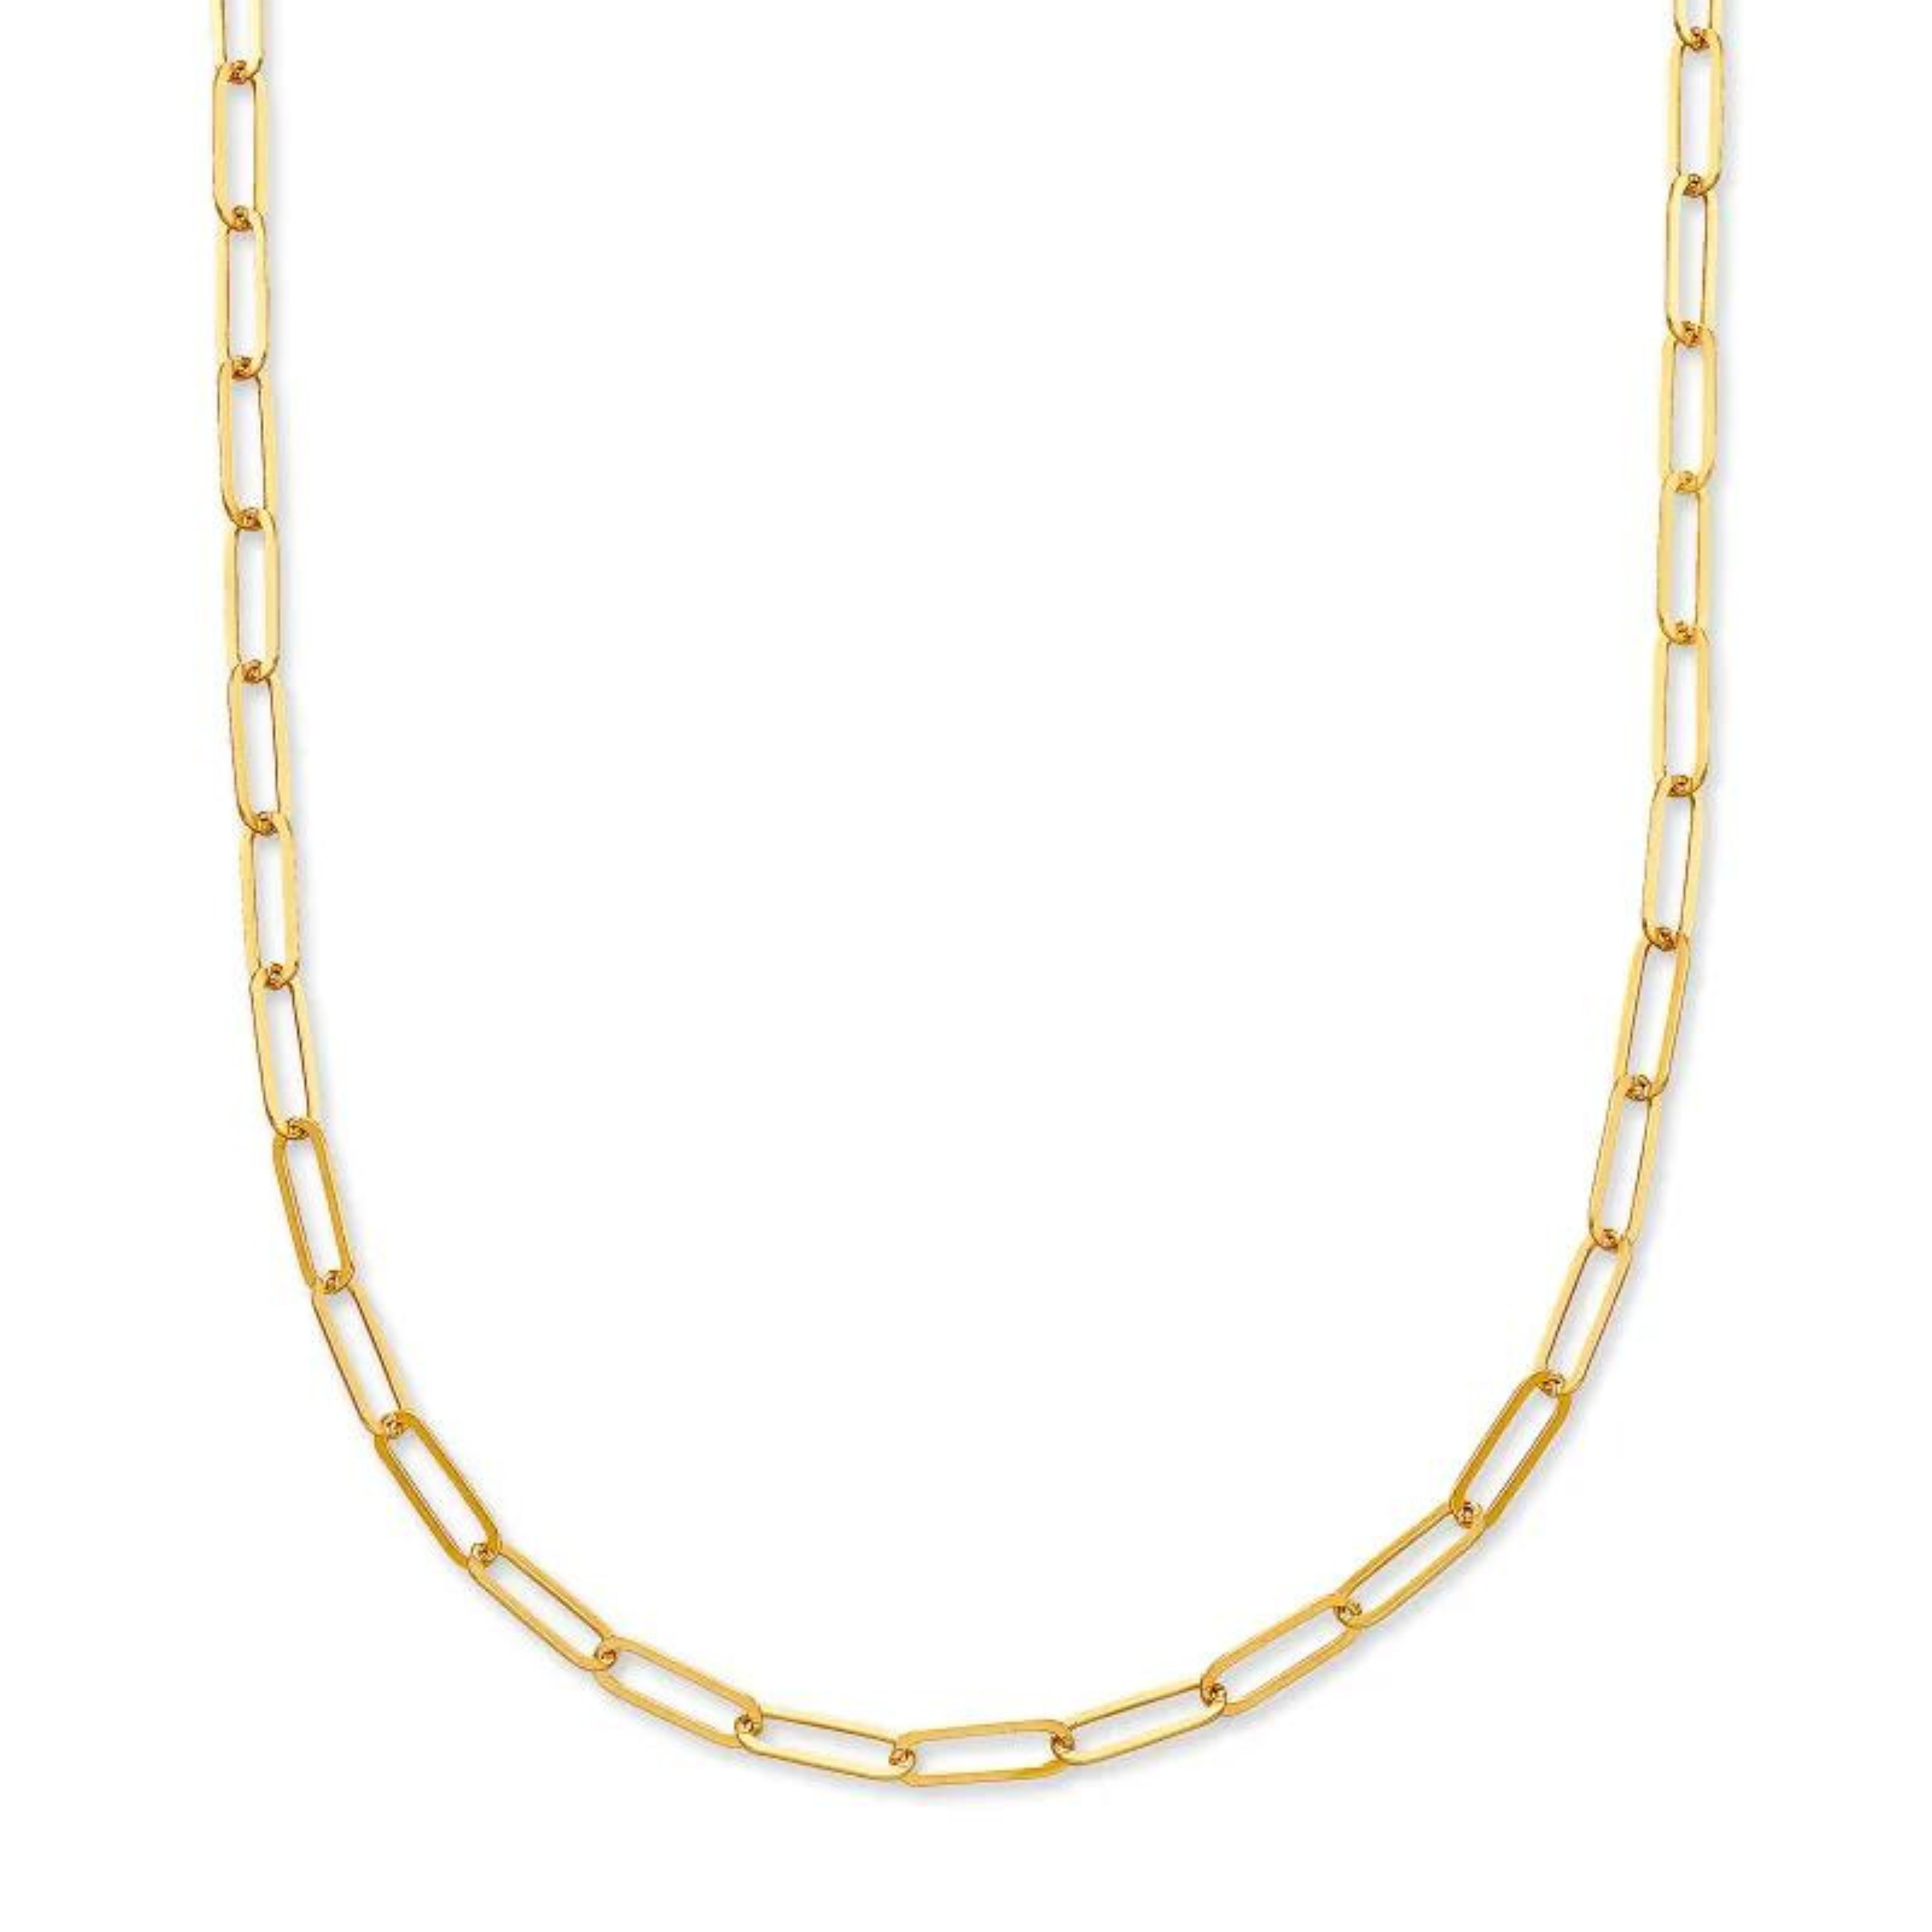 Gold, paperclip chain necklace pictured on a white background.